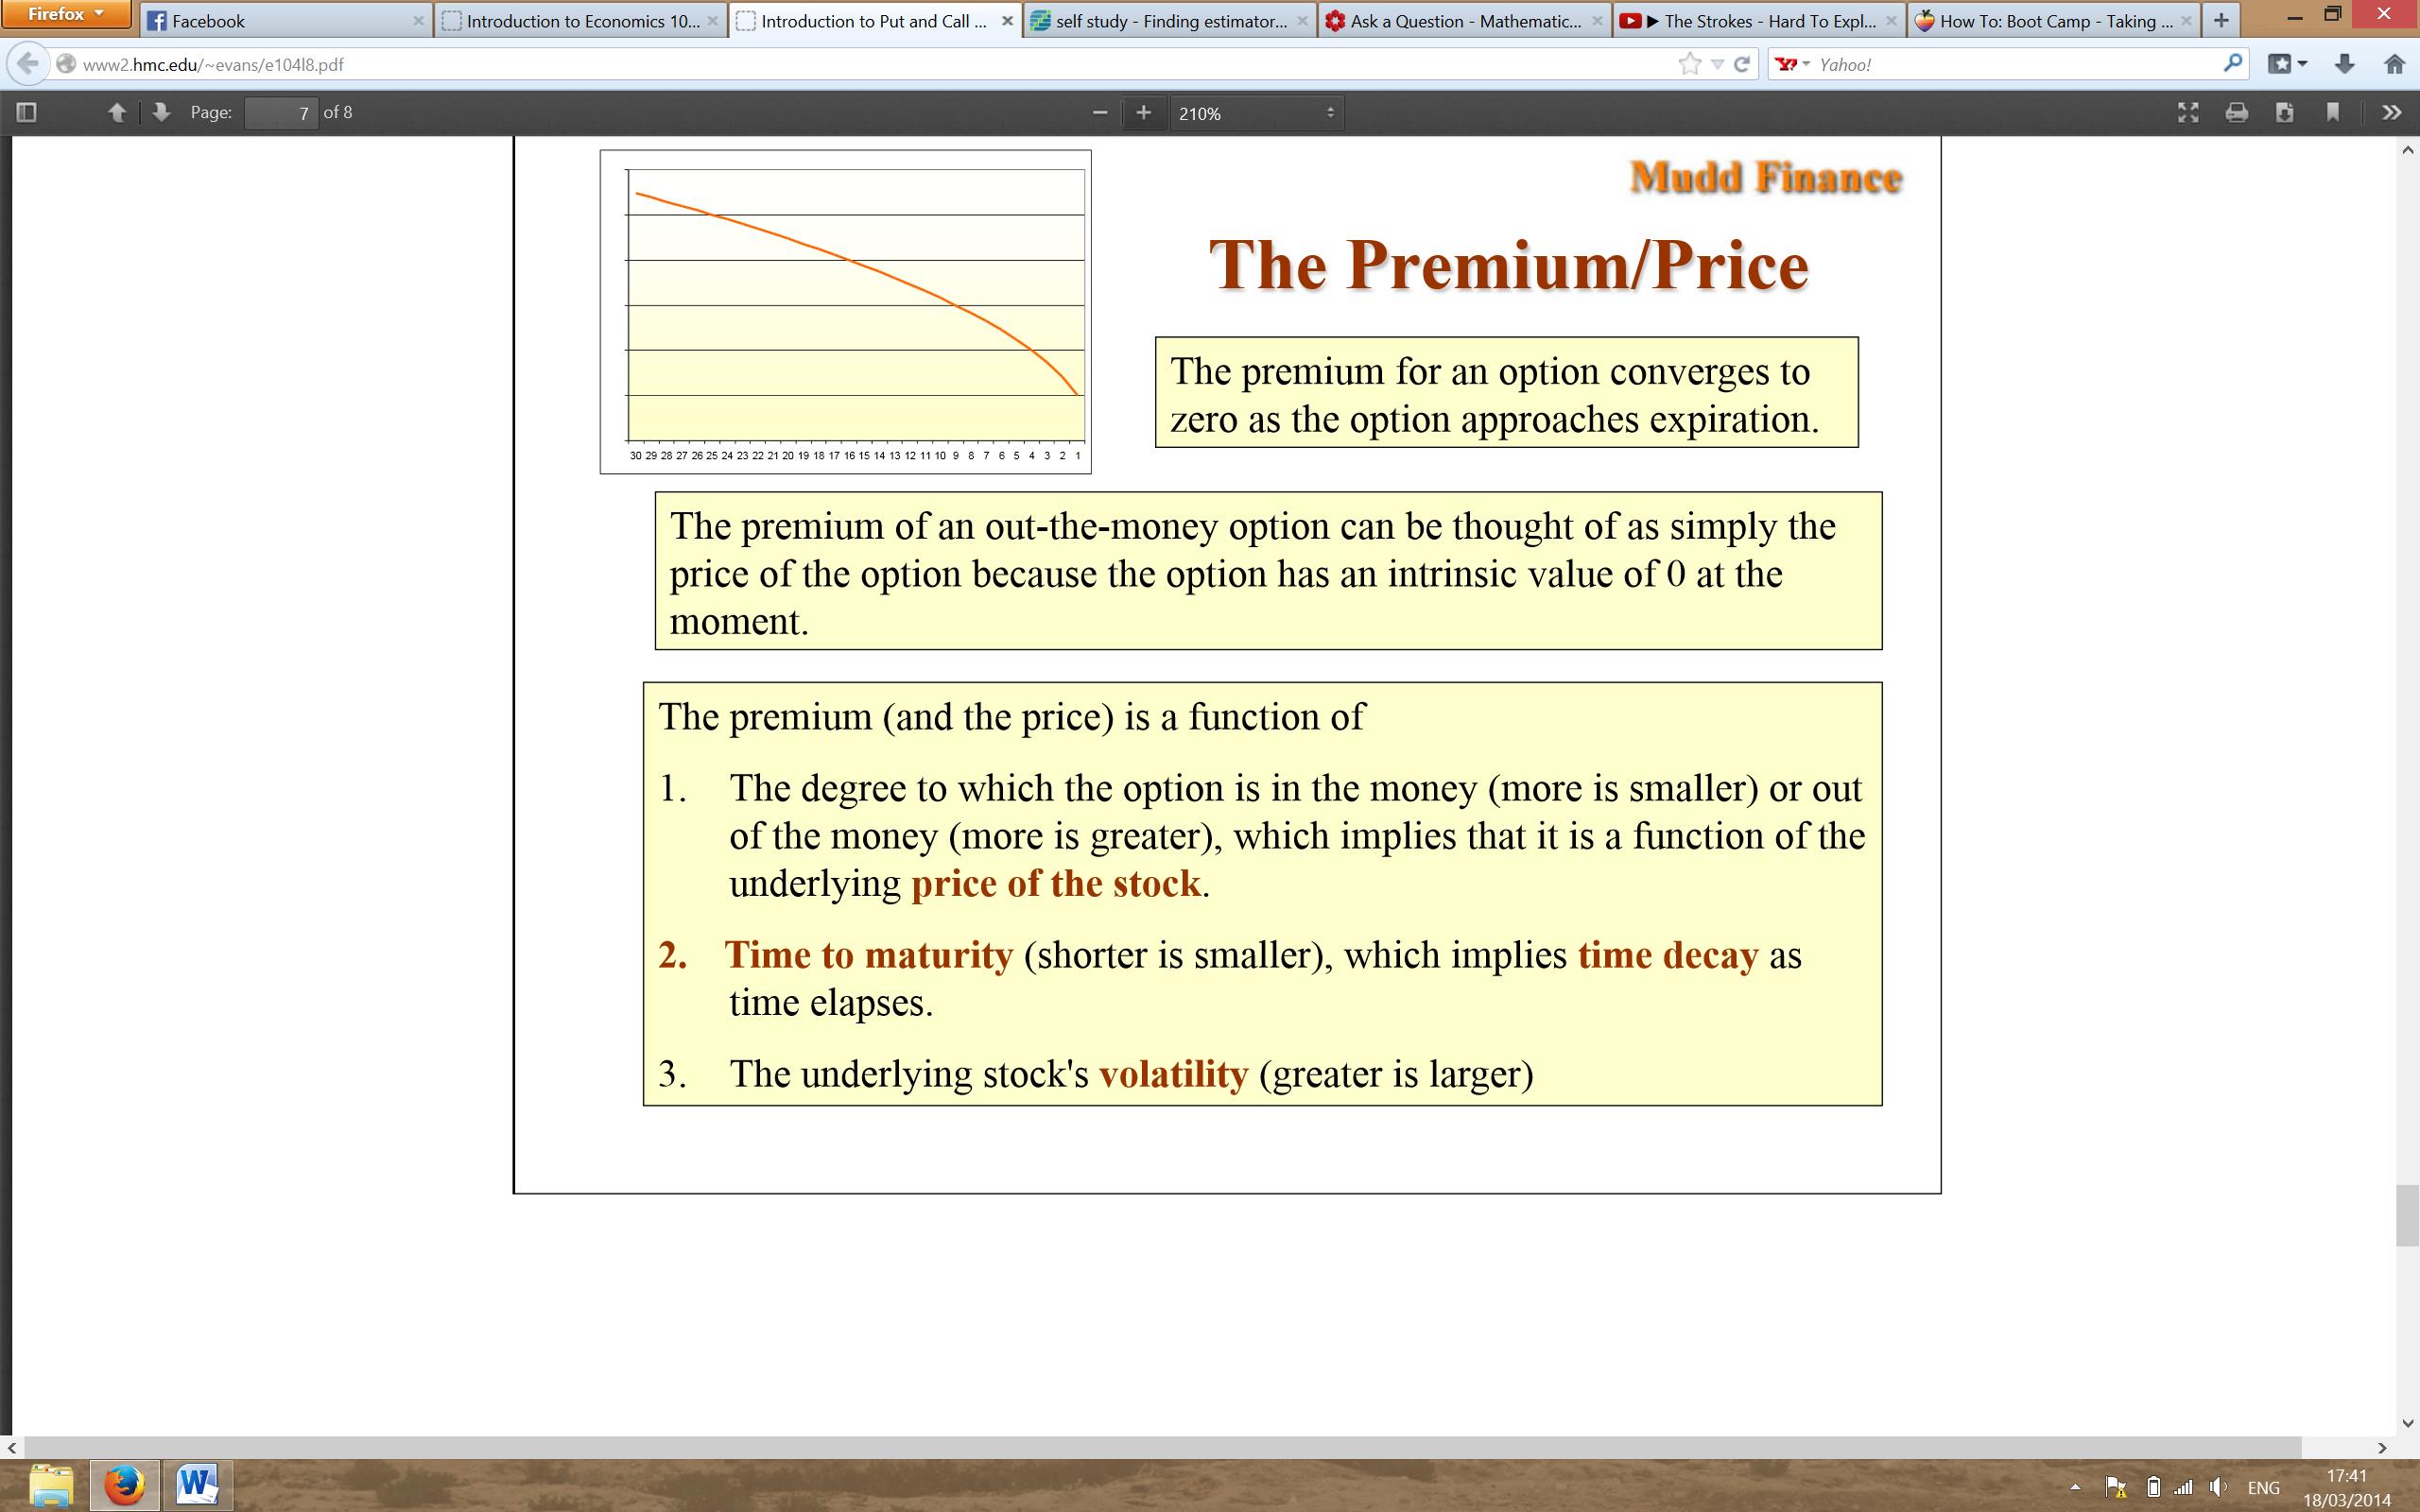 How Are Options Premiums Calculated?